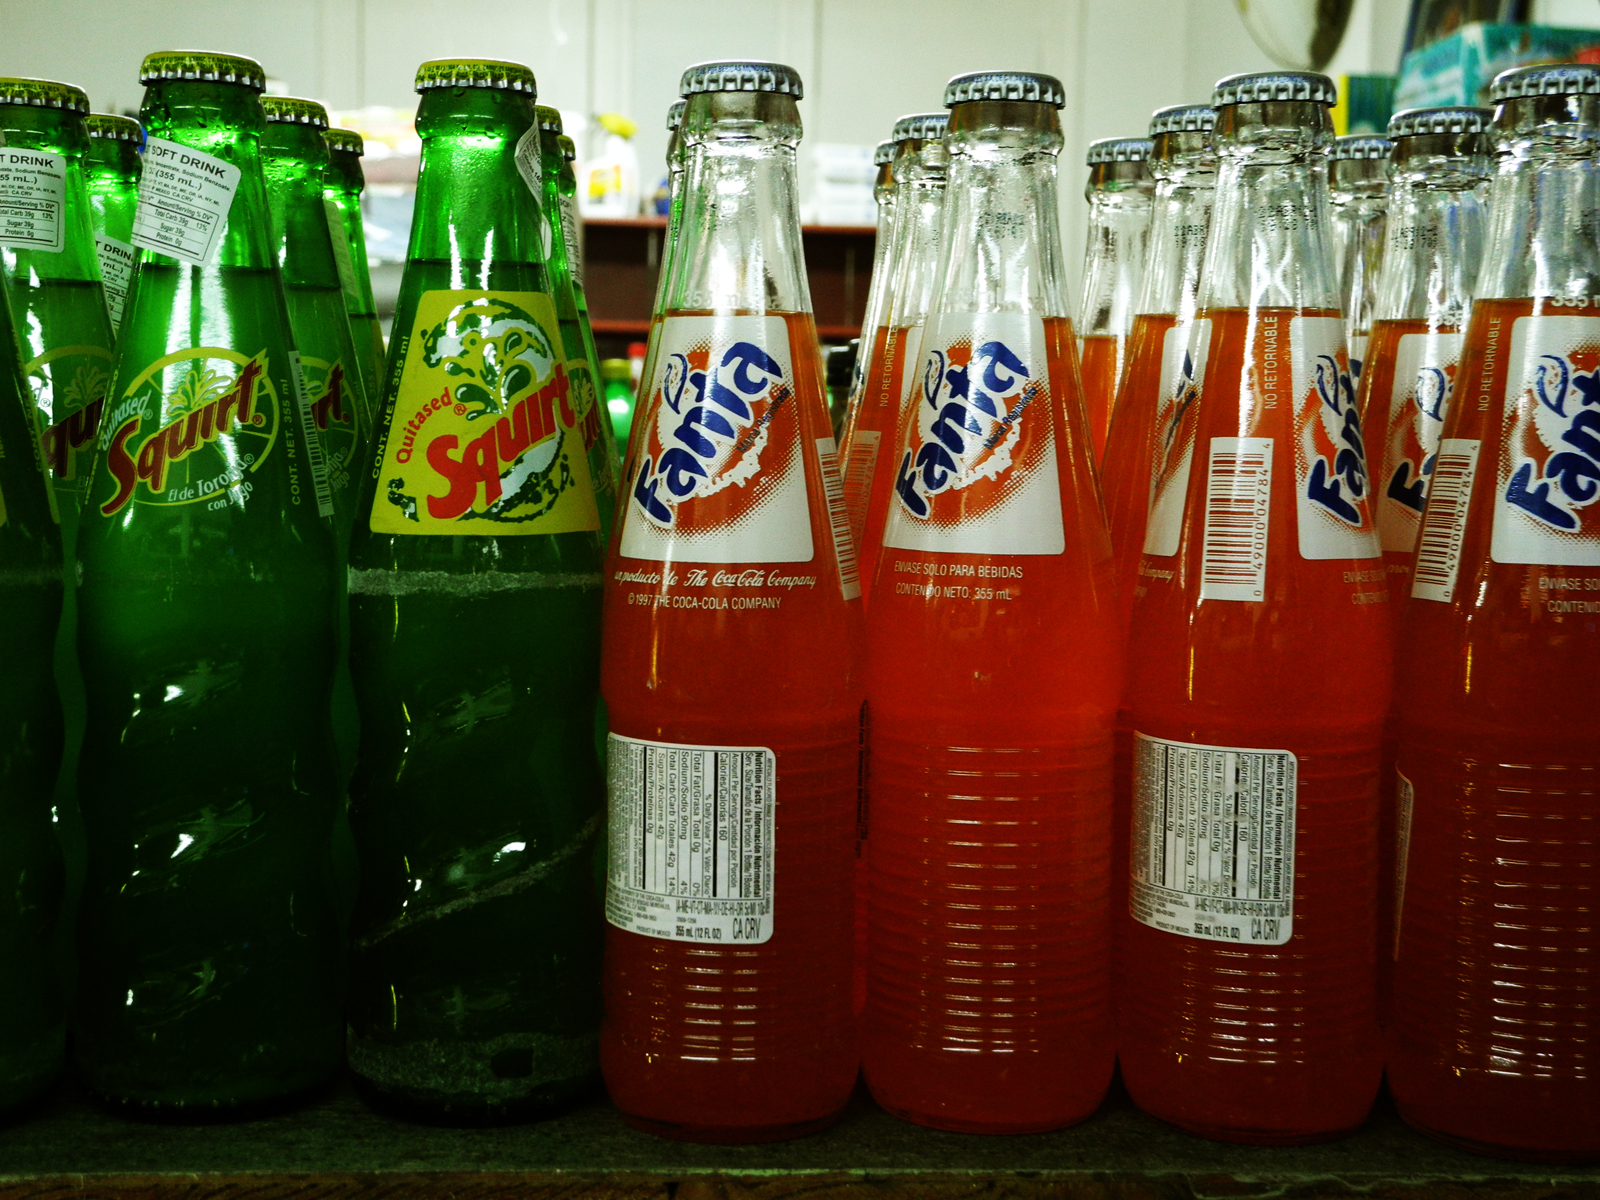 Bottles of soda are lined up on a shelf.